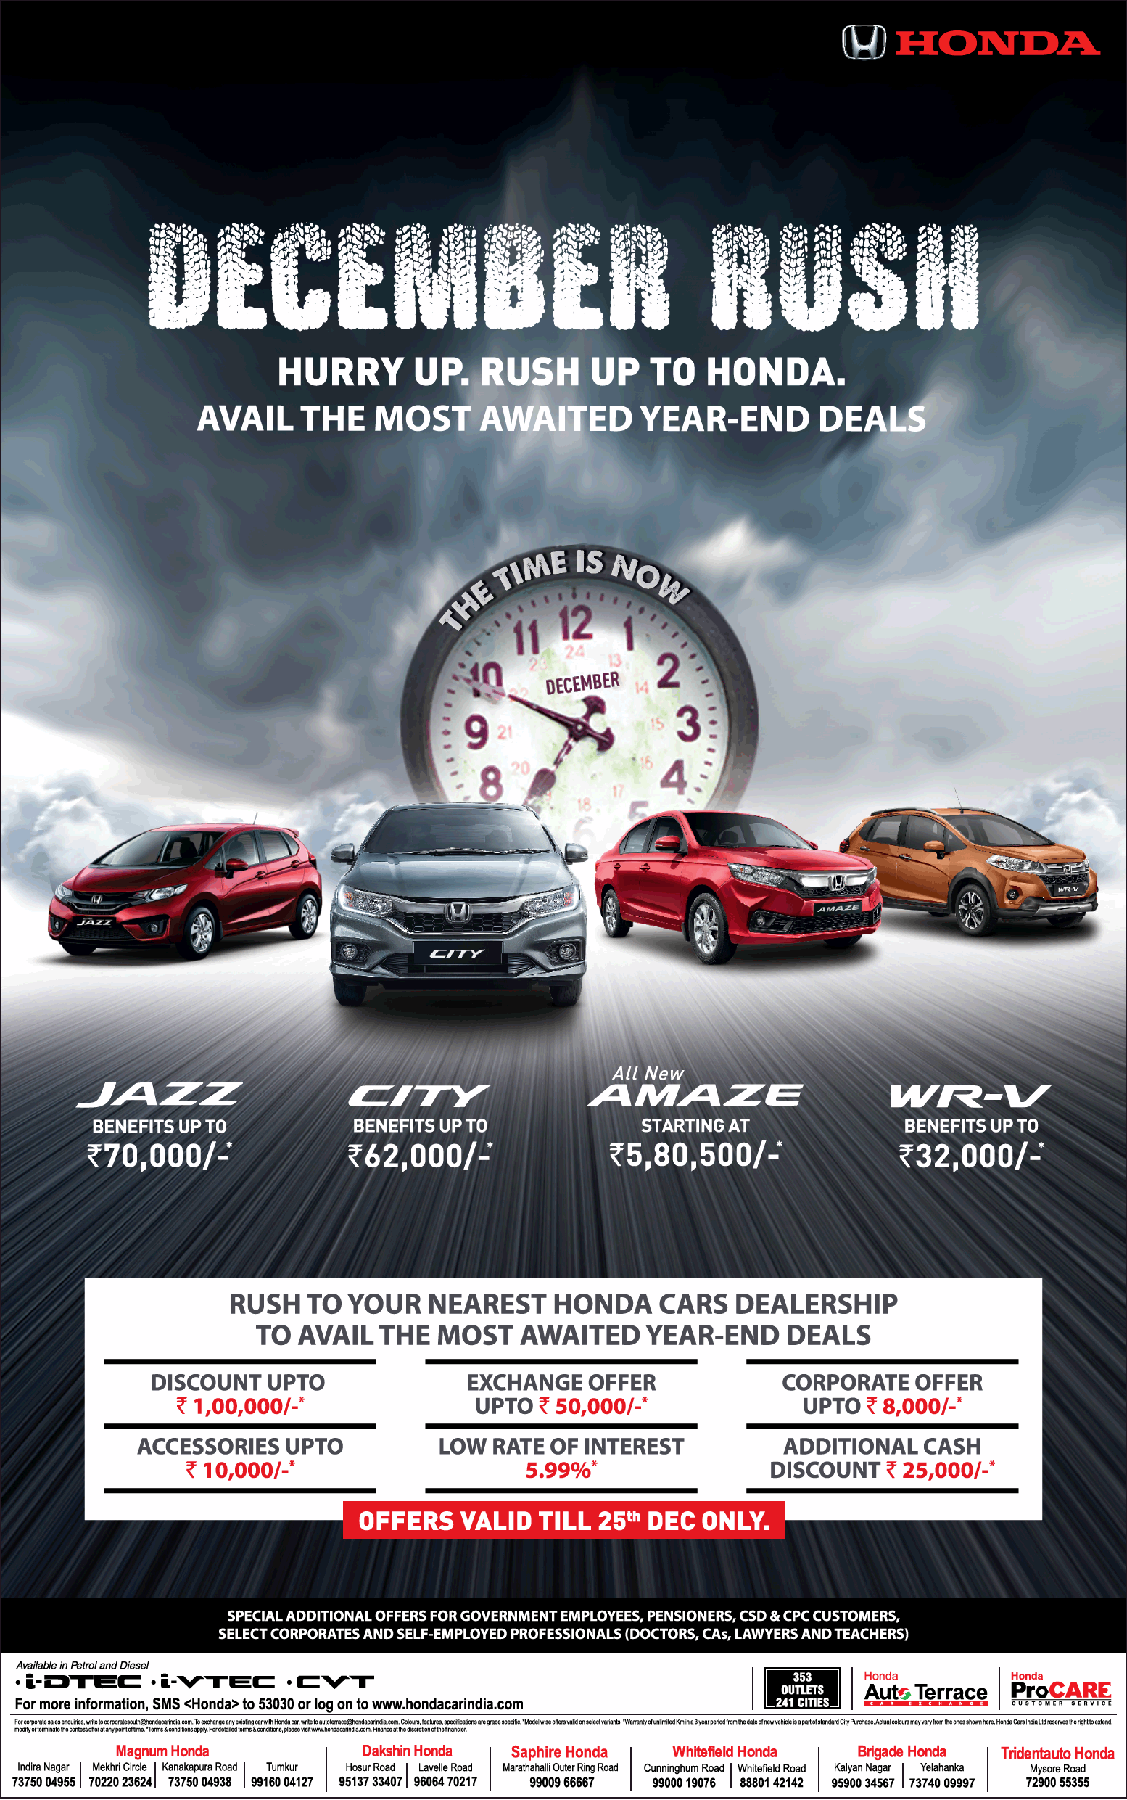 honda-december-rush-avail-the-most-awaited-year-end-deals-ad-times-of-india-bangalore-14-12-2018.png